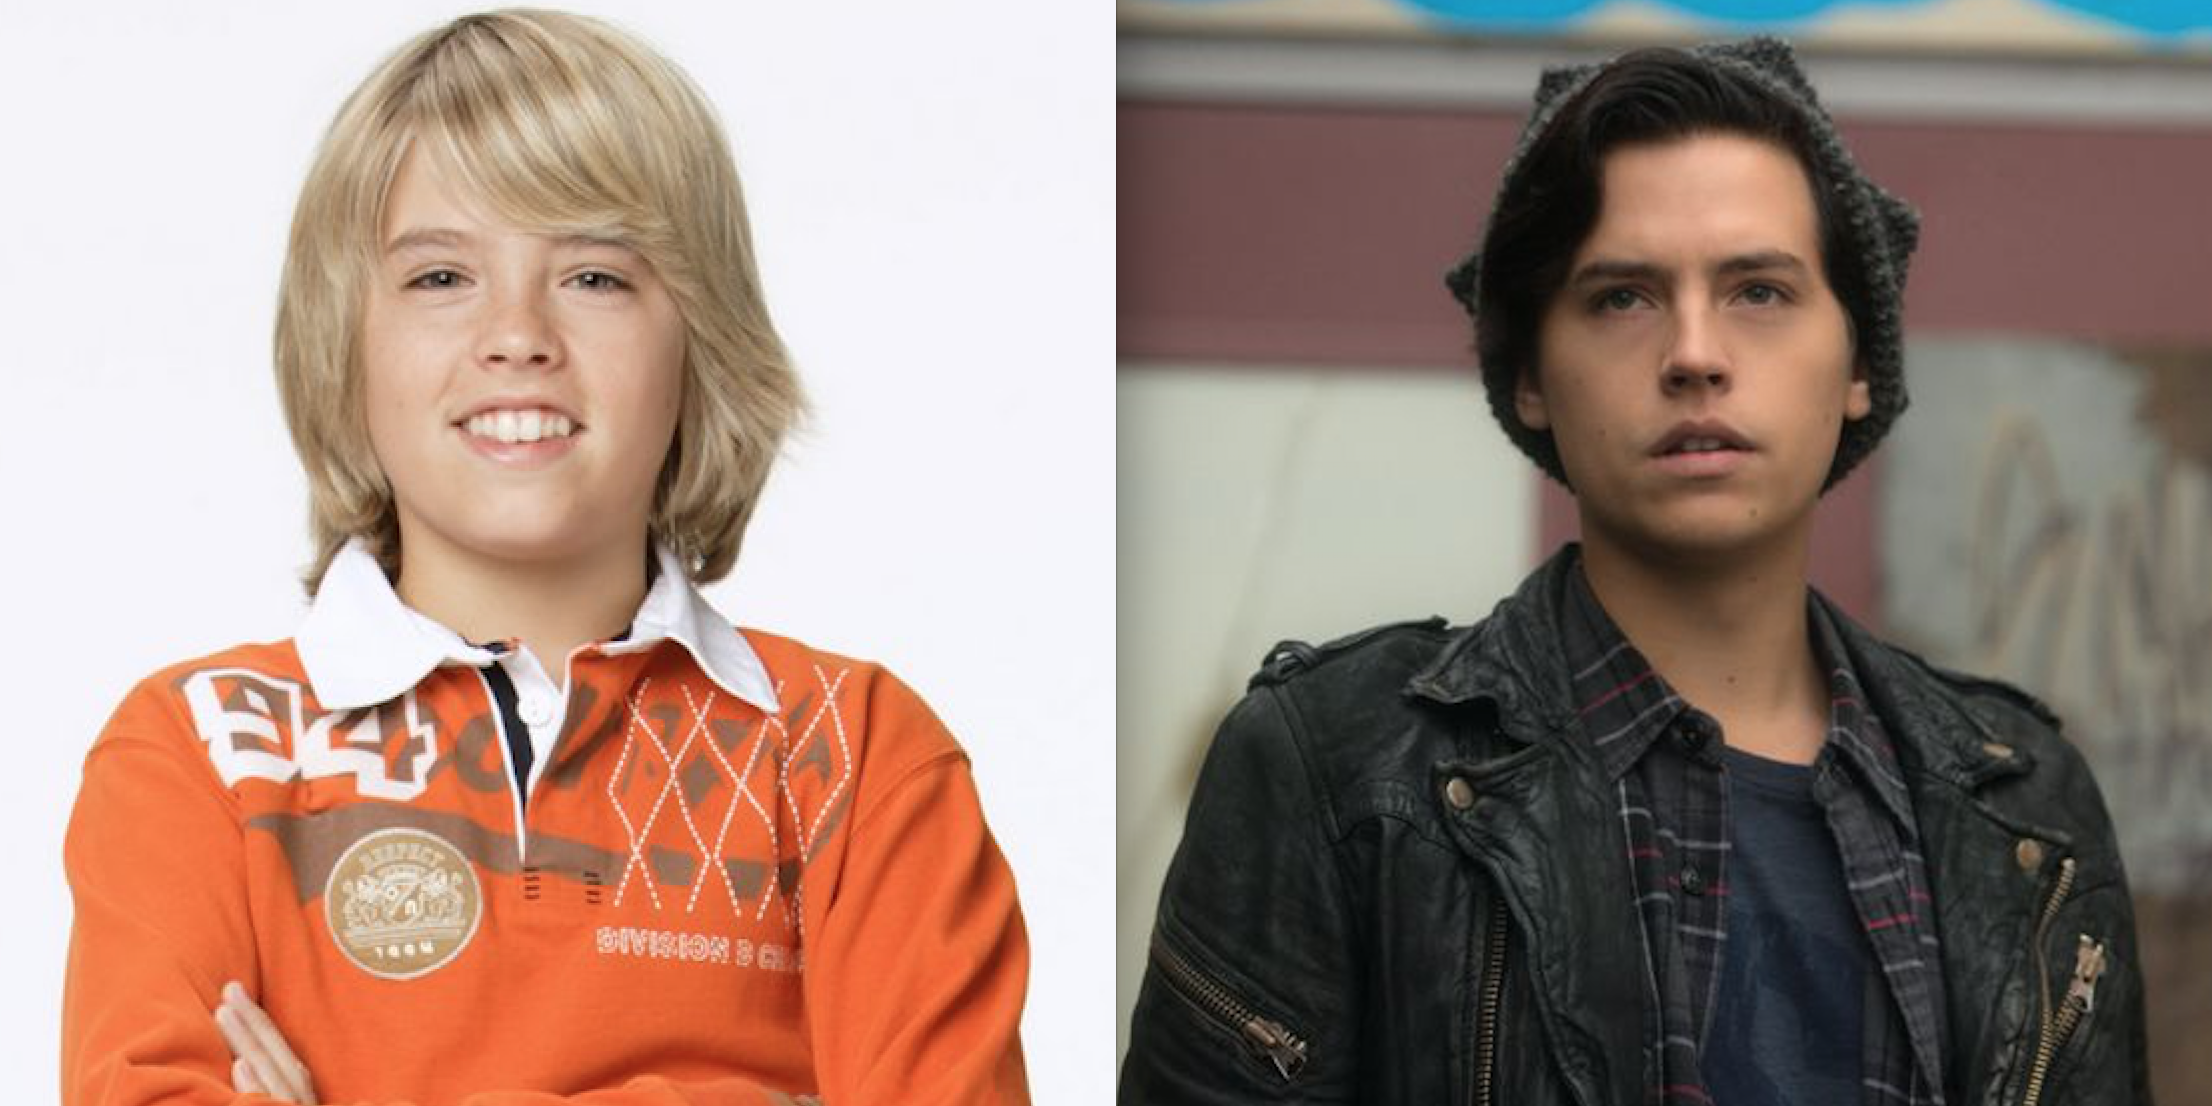 zack and cody 2022 real name